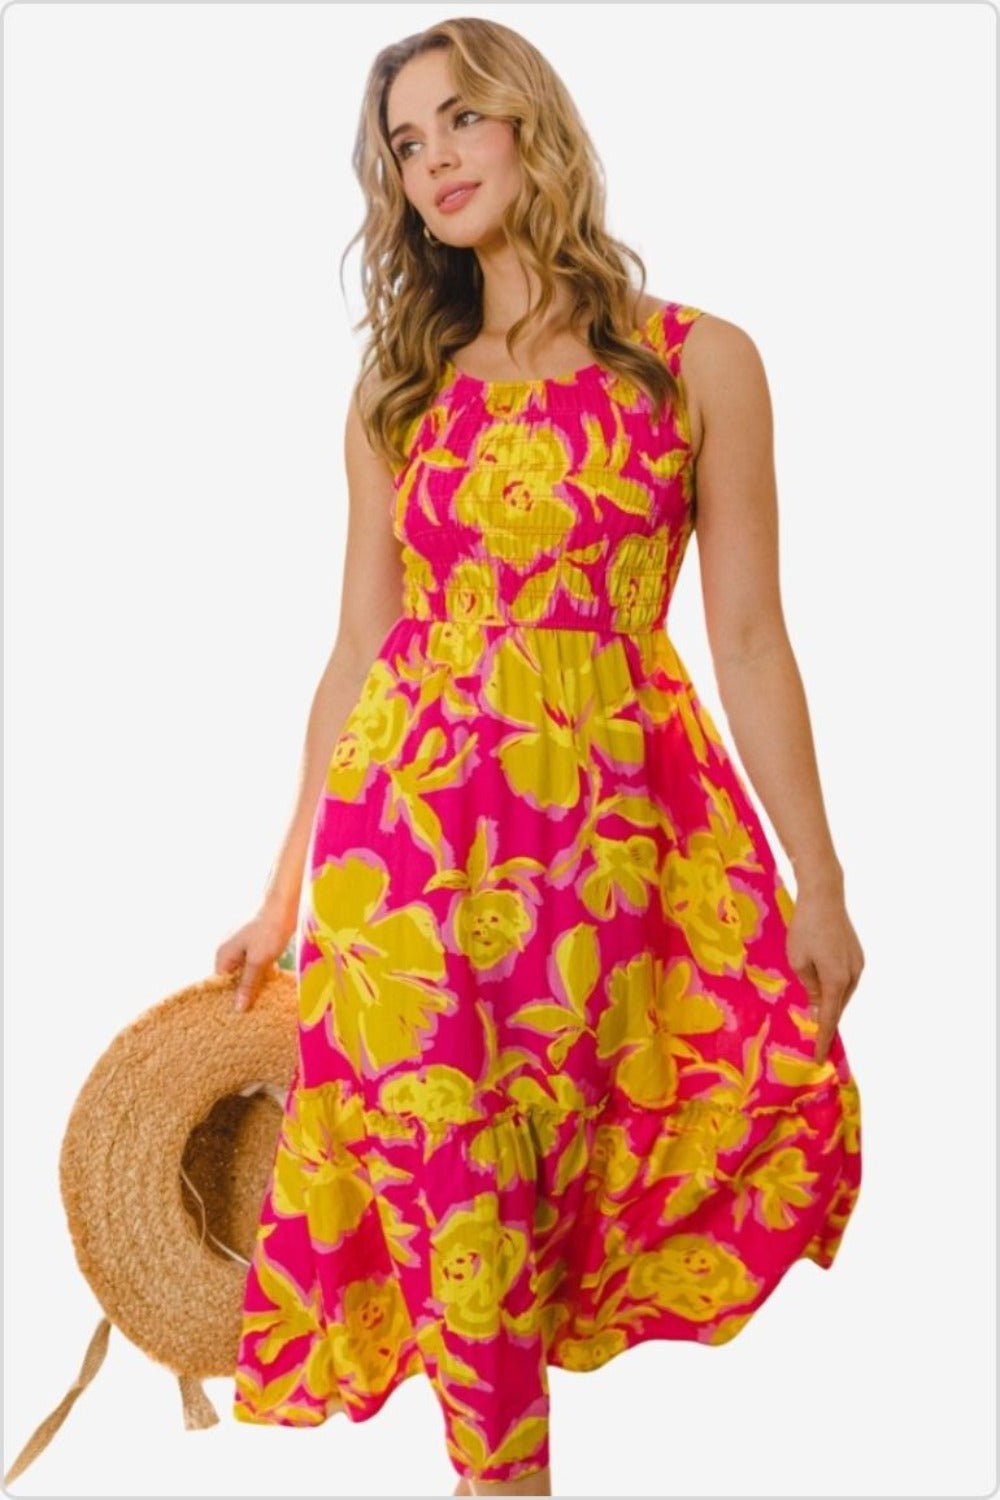 Woman with straw hat posing in a pink and yellow floral smocked ruffled midi dress.